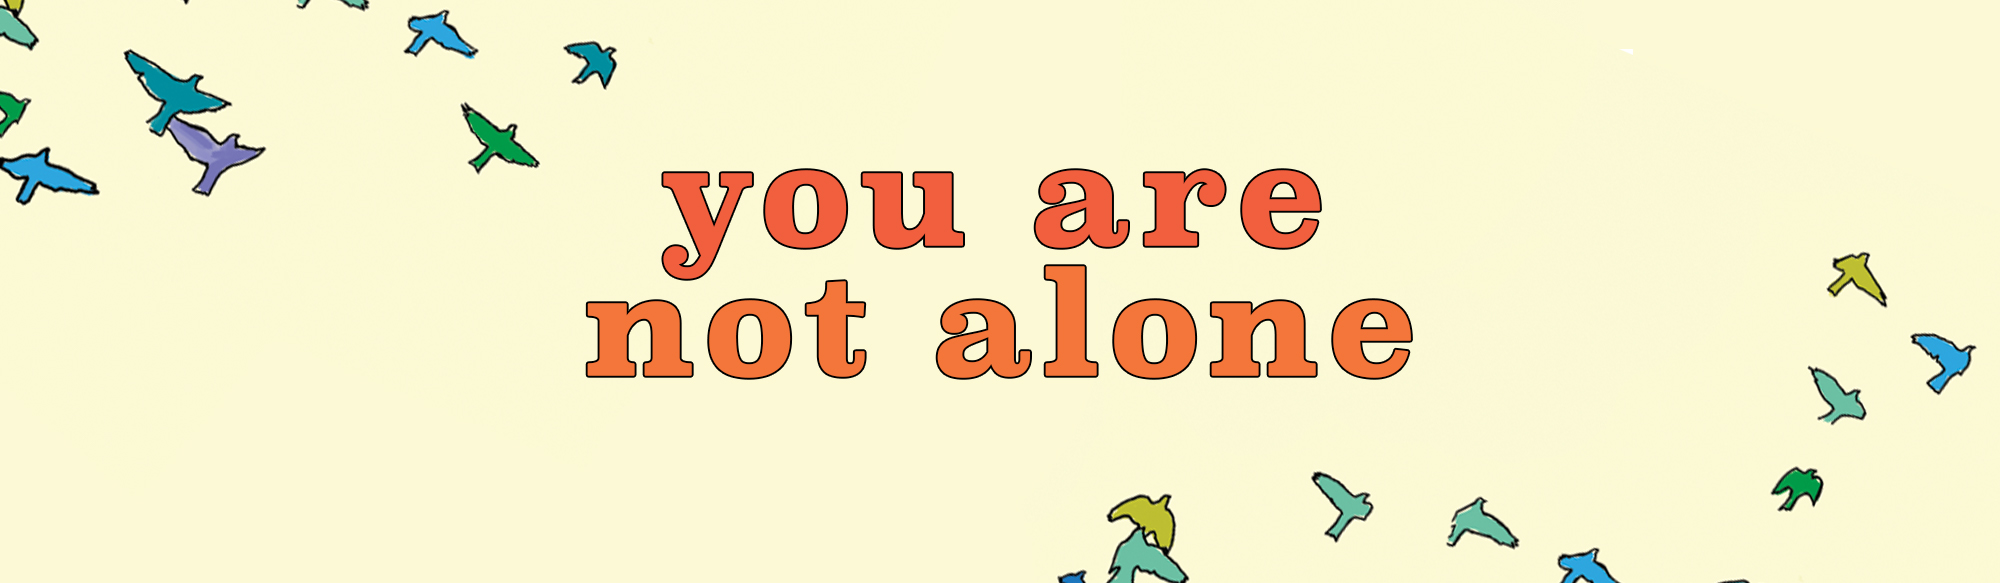 Graphic of the text "you are not alone" on top of a beige background with green, teal, blue birds flying around.